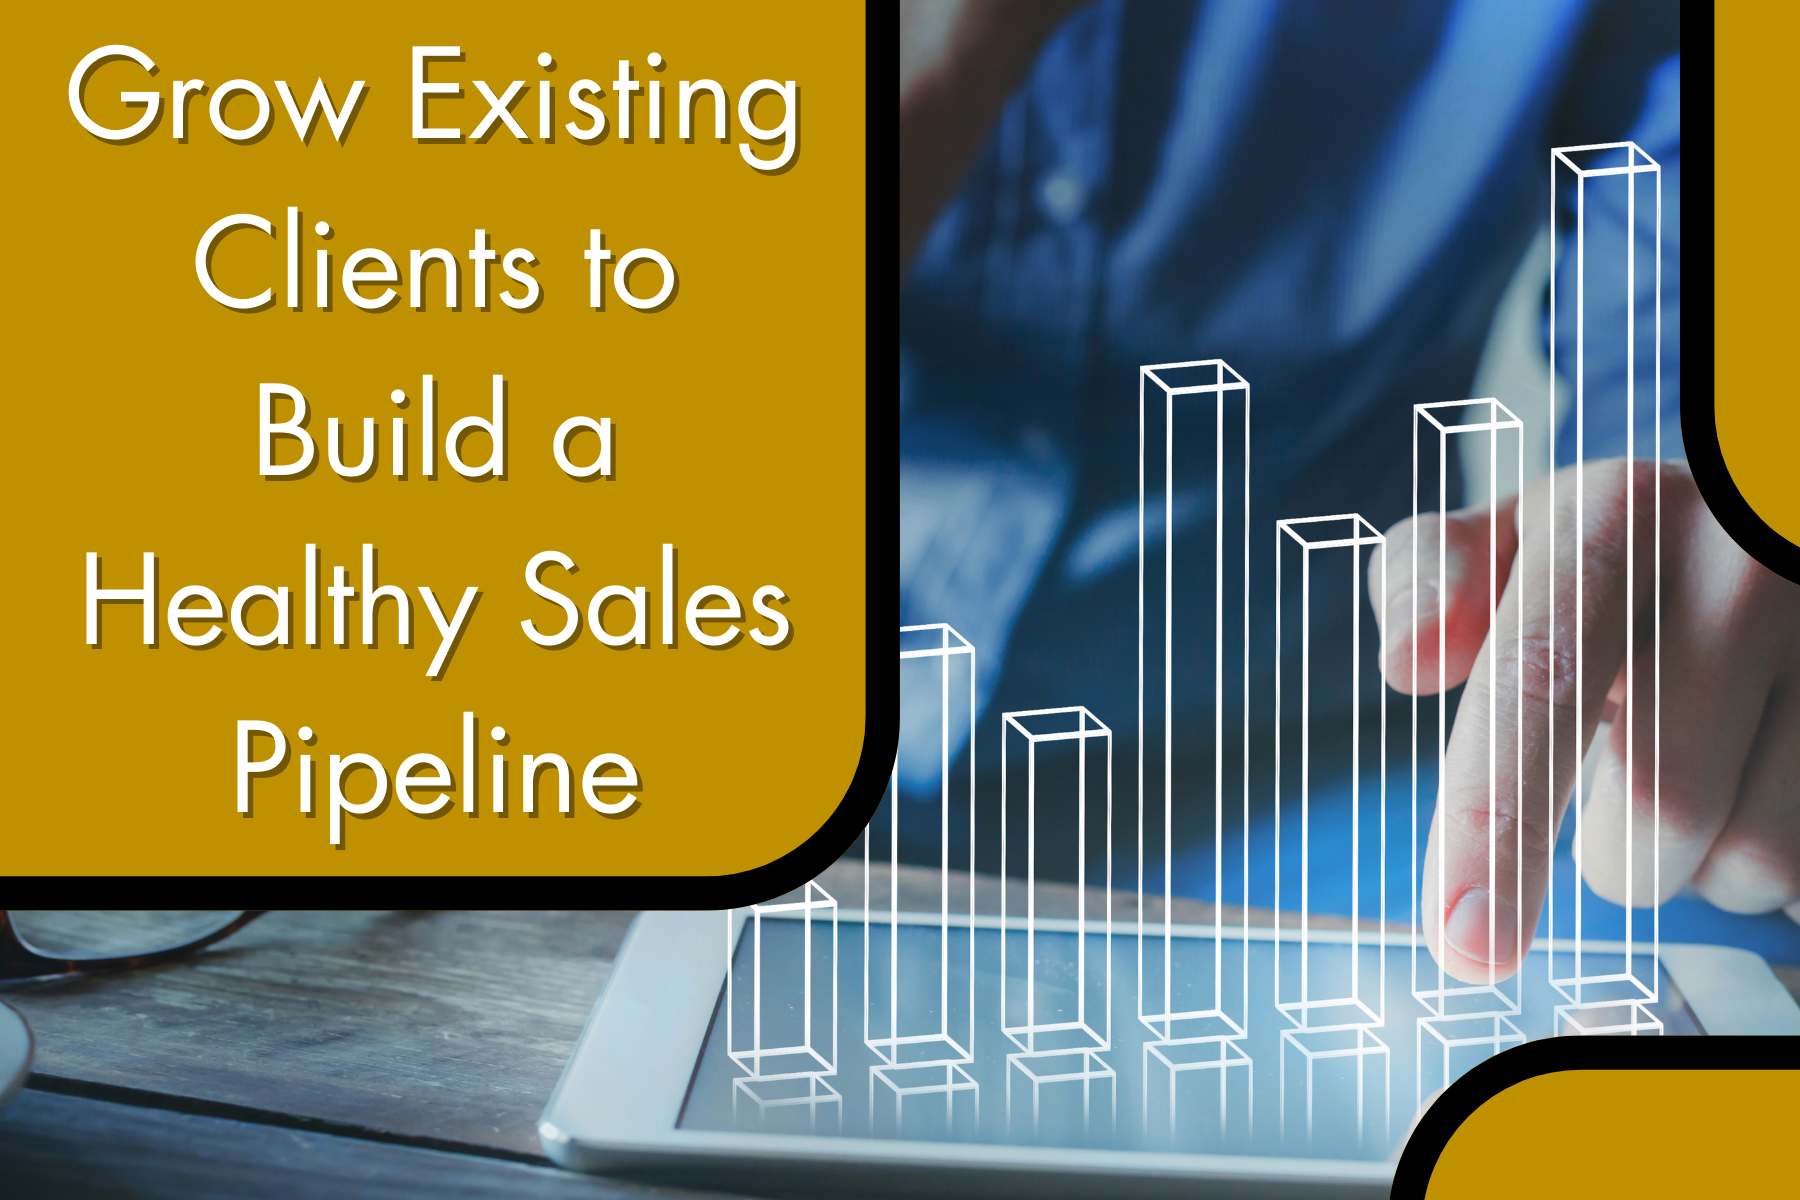 Grow Existing Clients to Build a Healthy Sales Pipeline